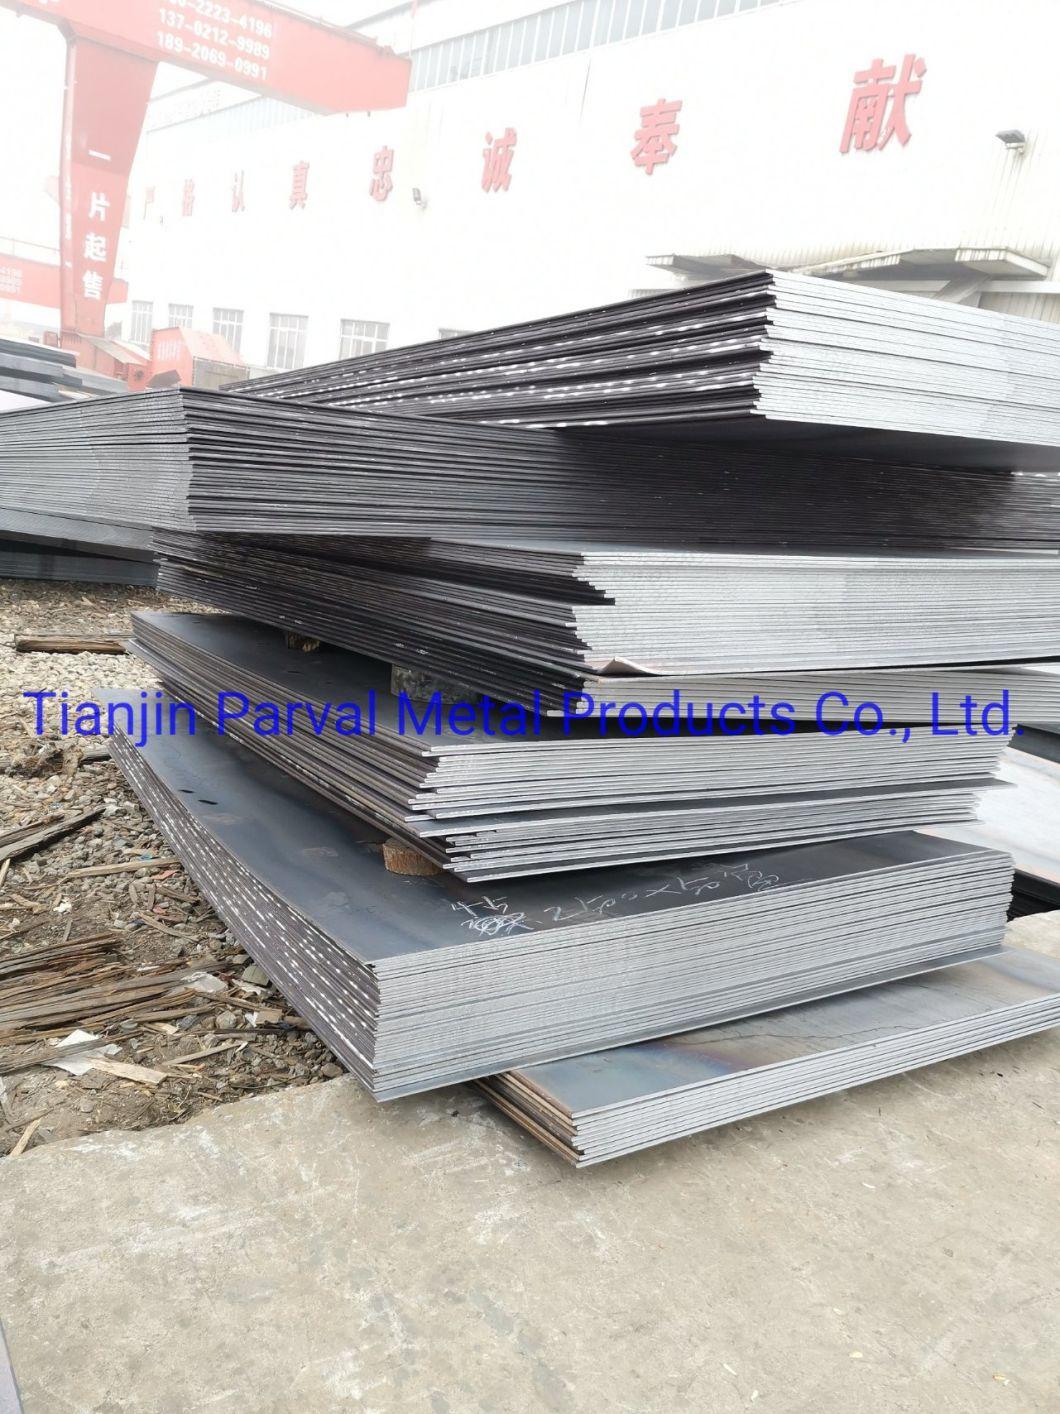 Q370QC/D/E Bridge Steel Hot/Cold Rolled Polished Corrosion Roofing Constructions Buildings Wear Resistant Steel Sheets/Plate